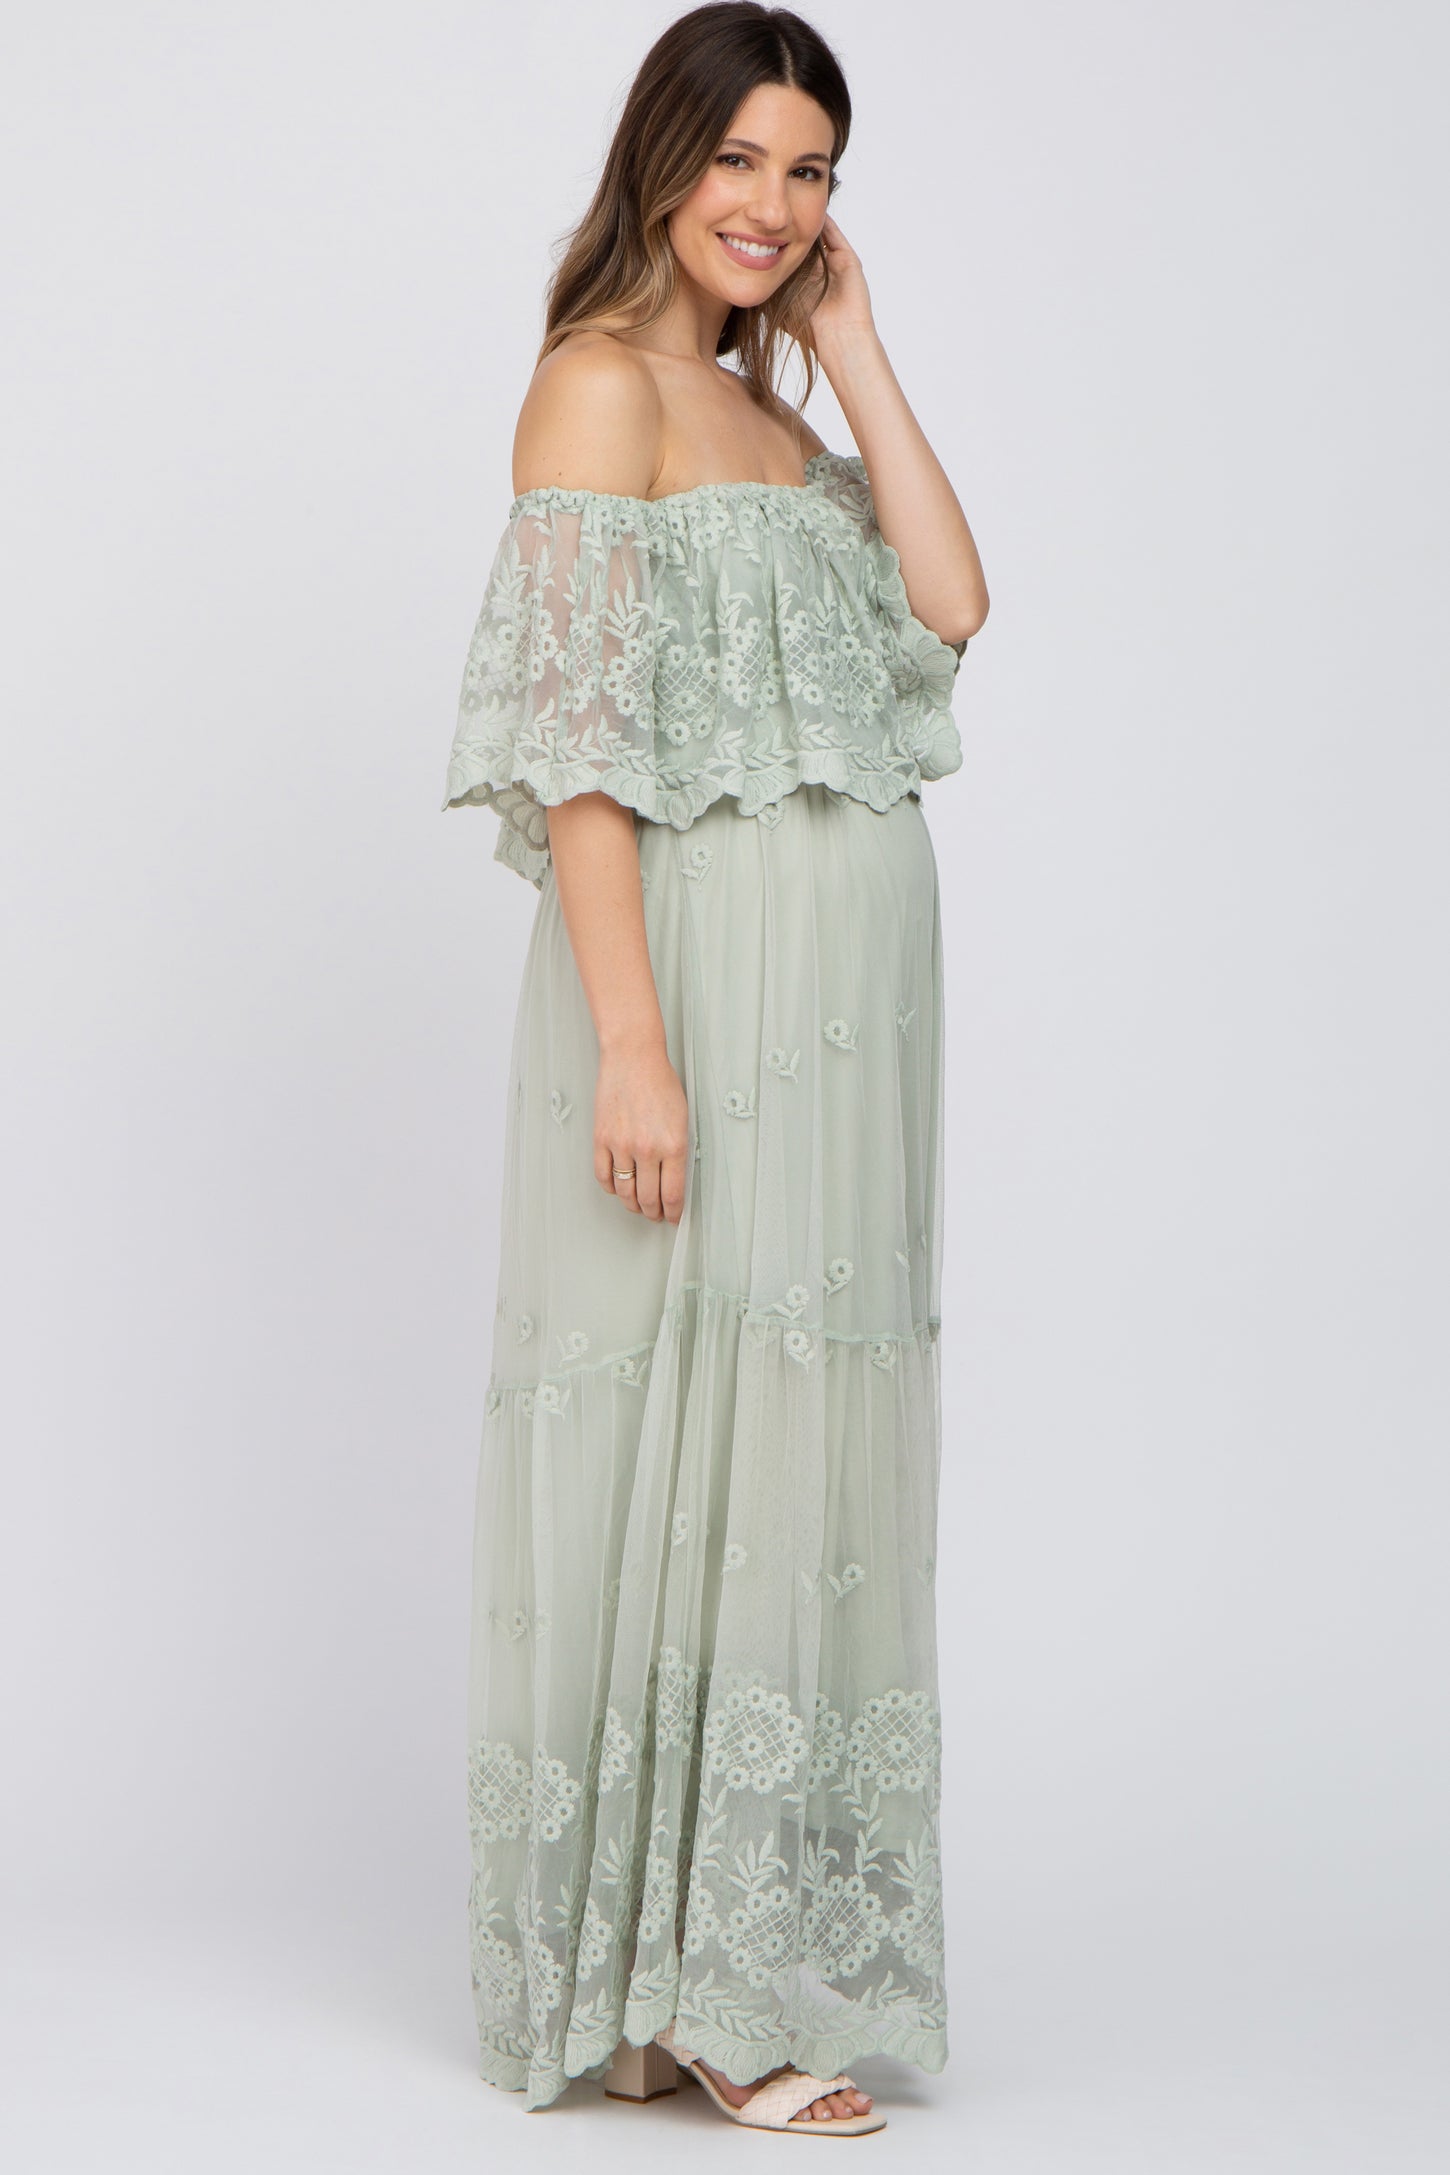 Light Green Lace Overlay Off Shoulder Maternity Maxi Dress